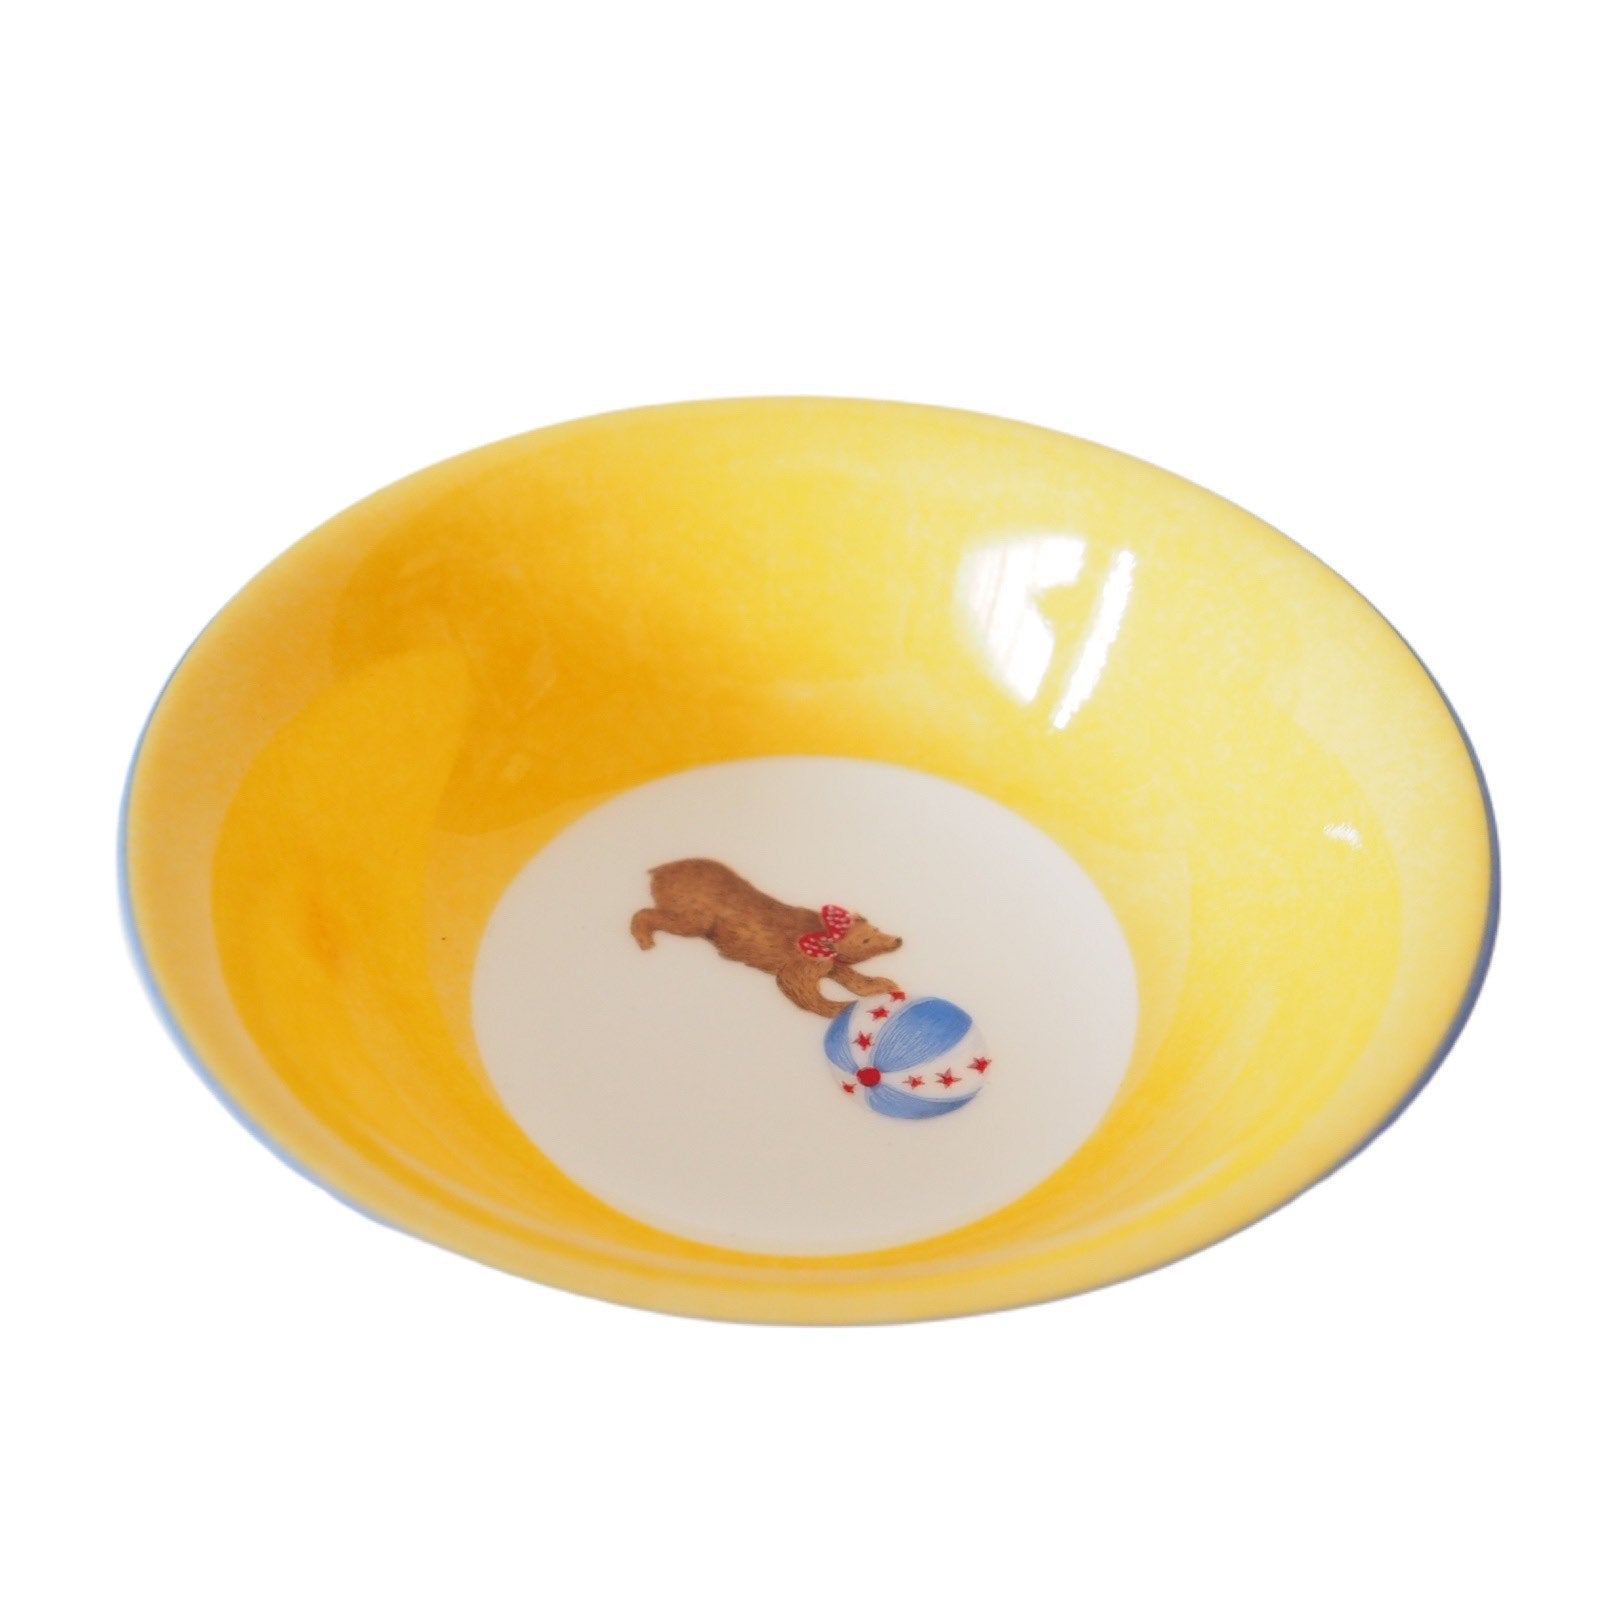 HERMES Plate Tableware  Yellow  Animal Porcelain Authentic